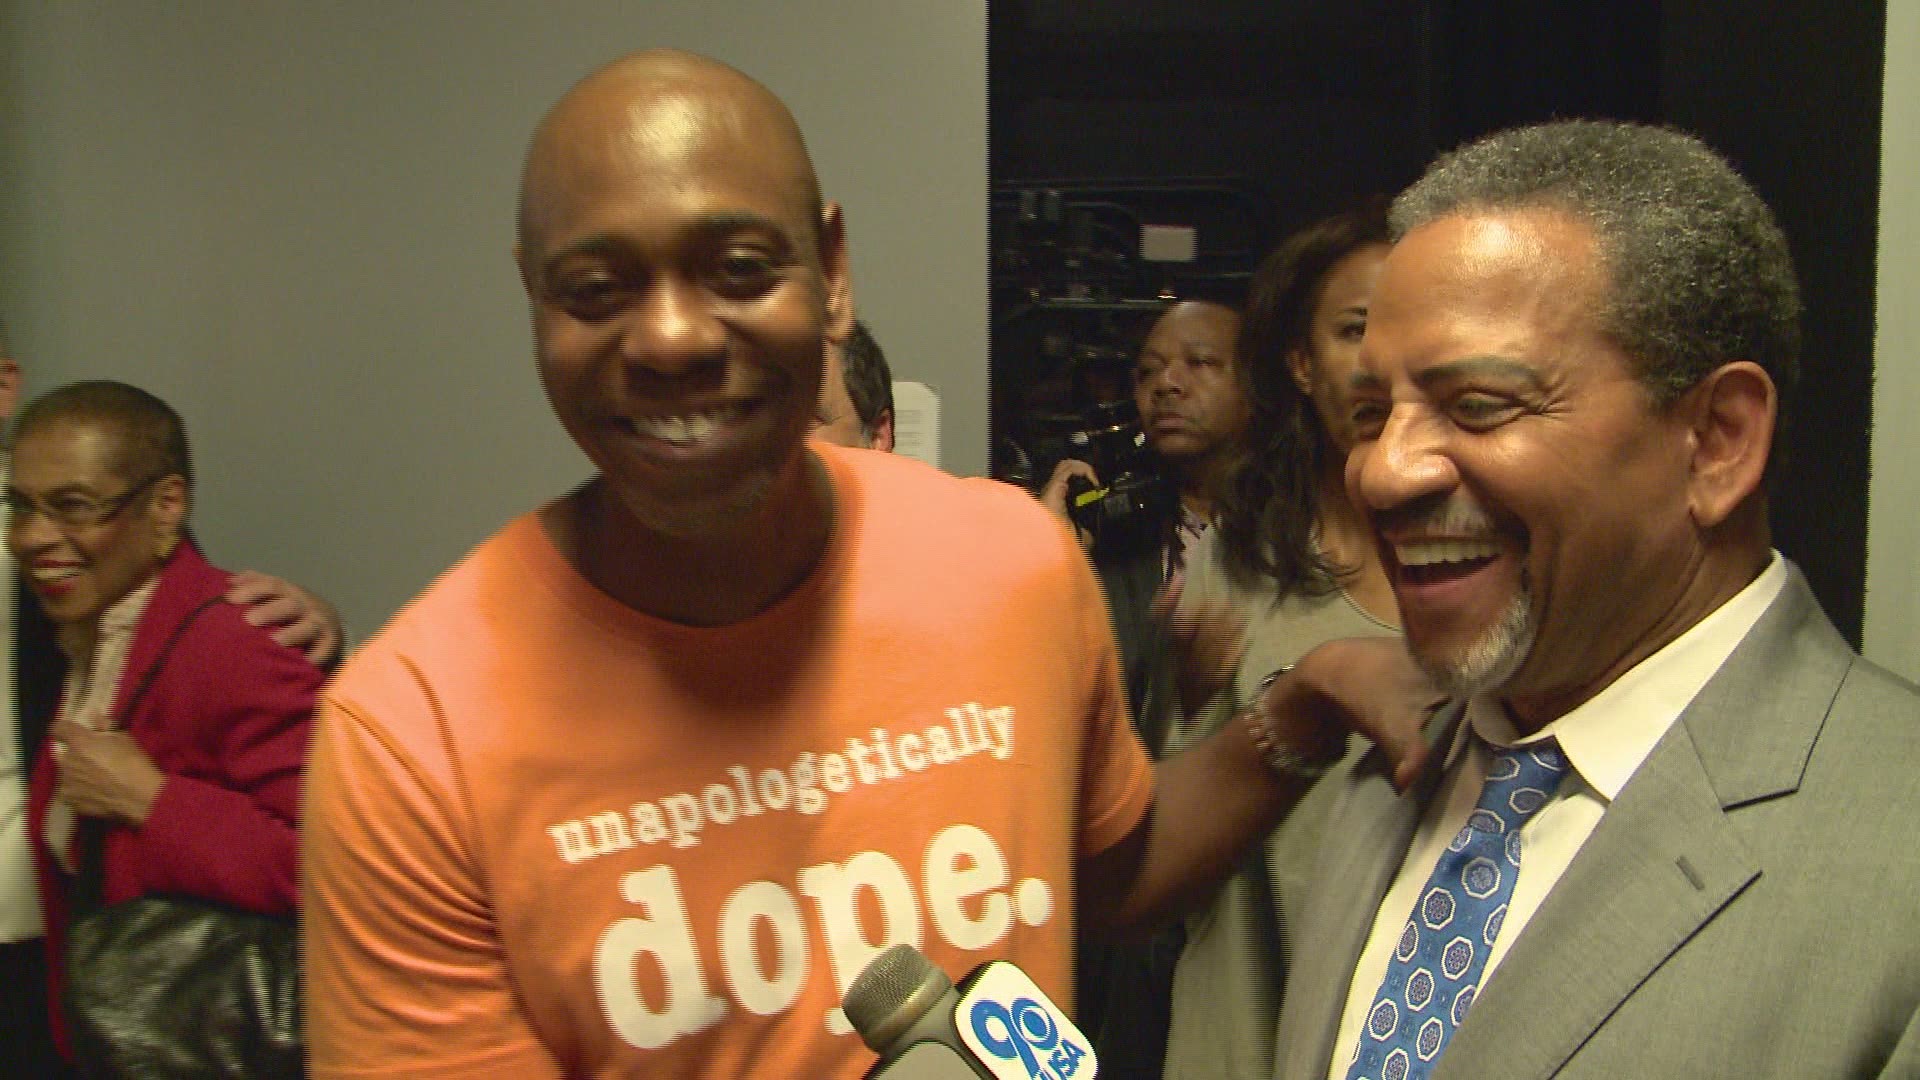 Comedian Dave Chappelle stopped by his alma mater, Duke Ellington School for the Arts, to talk to students. WUSA9's Bruce Johnson tagged along.